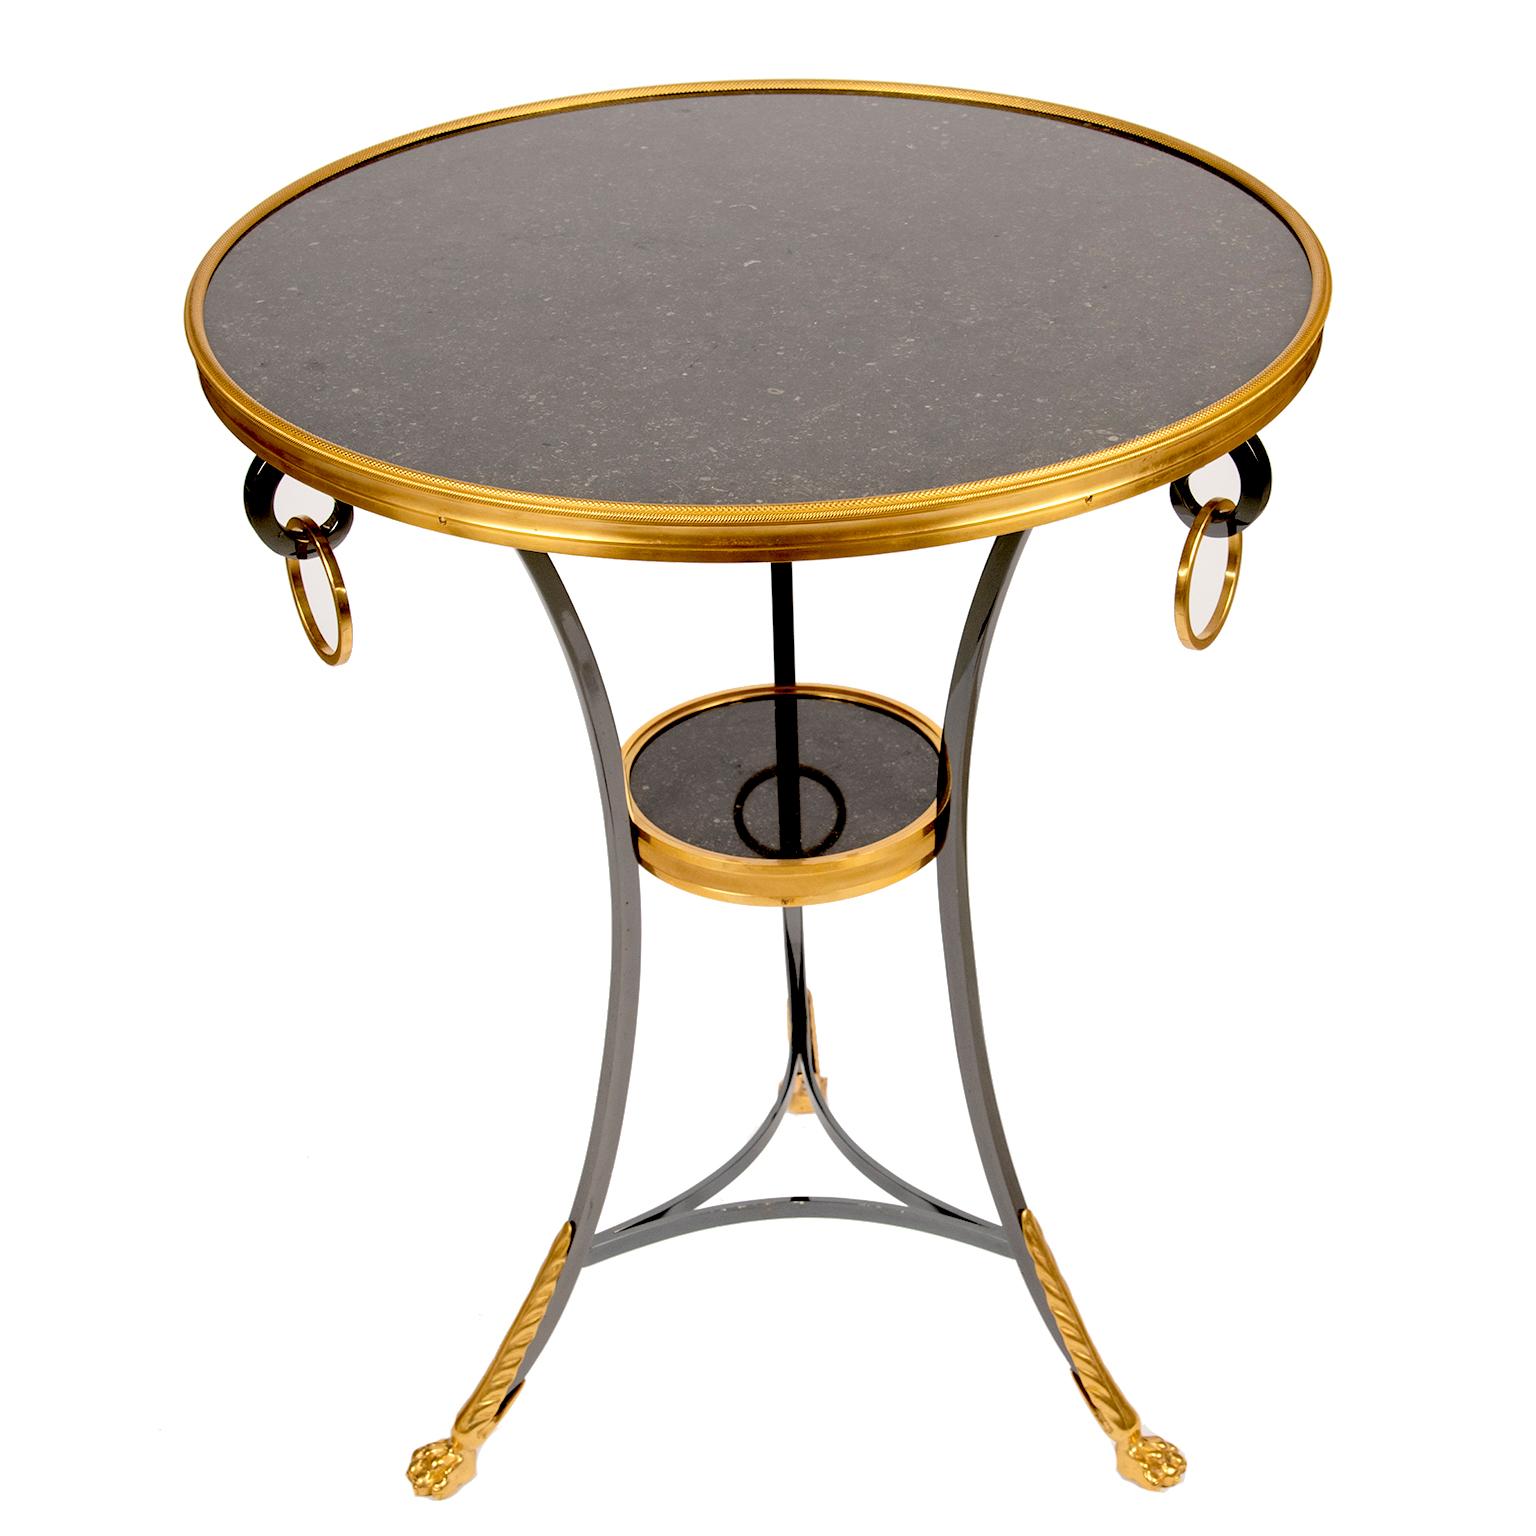 Bronzed Vintage French Directoire Guéridon Occasional Table